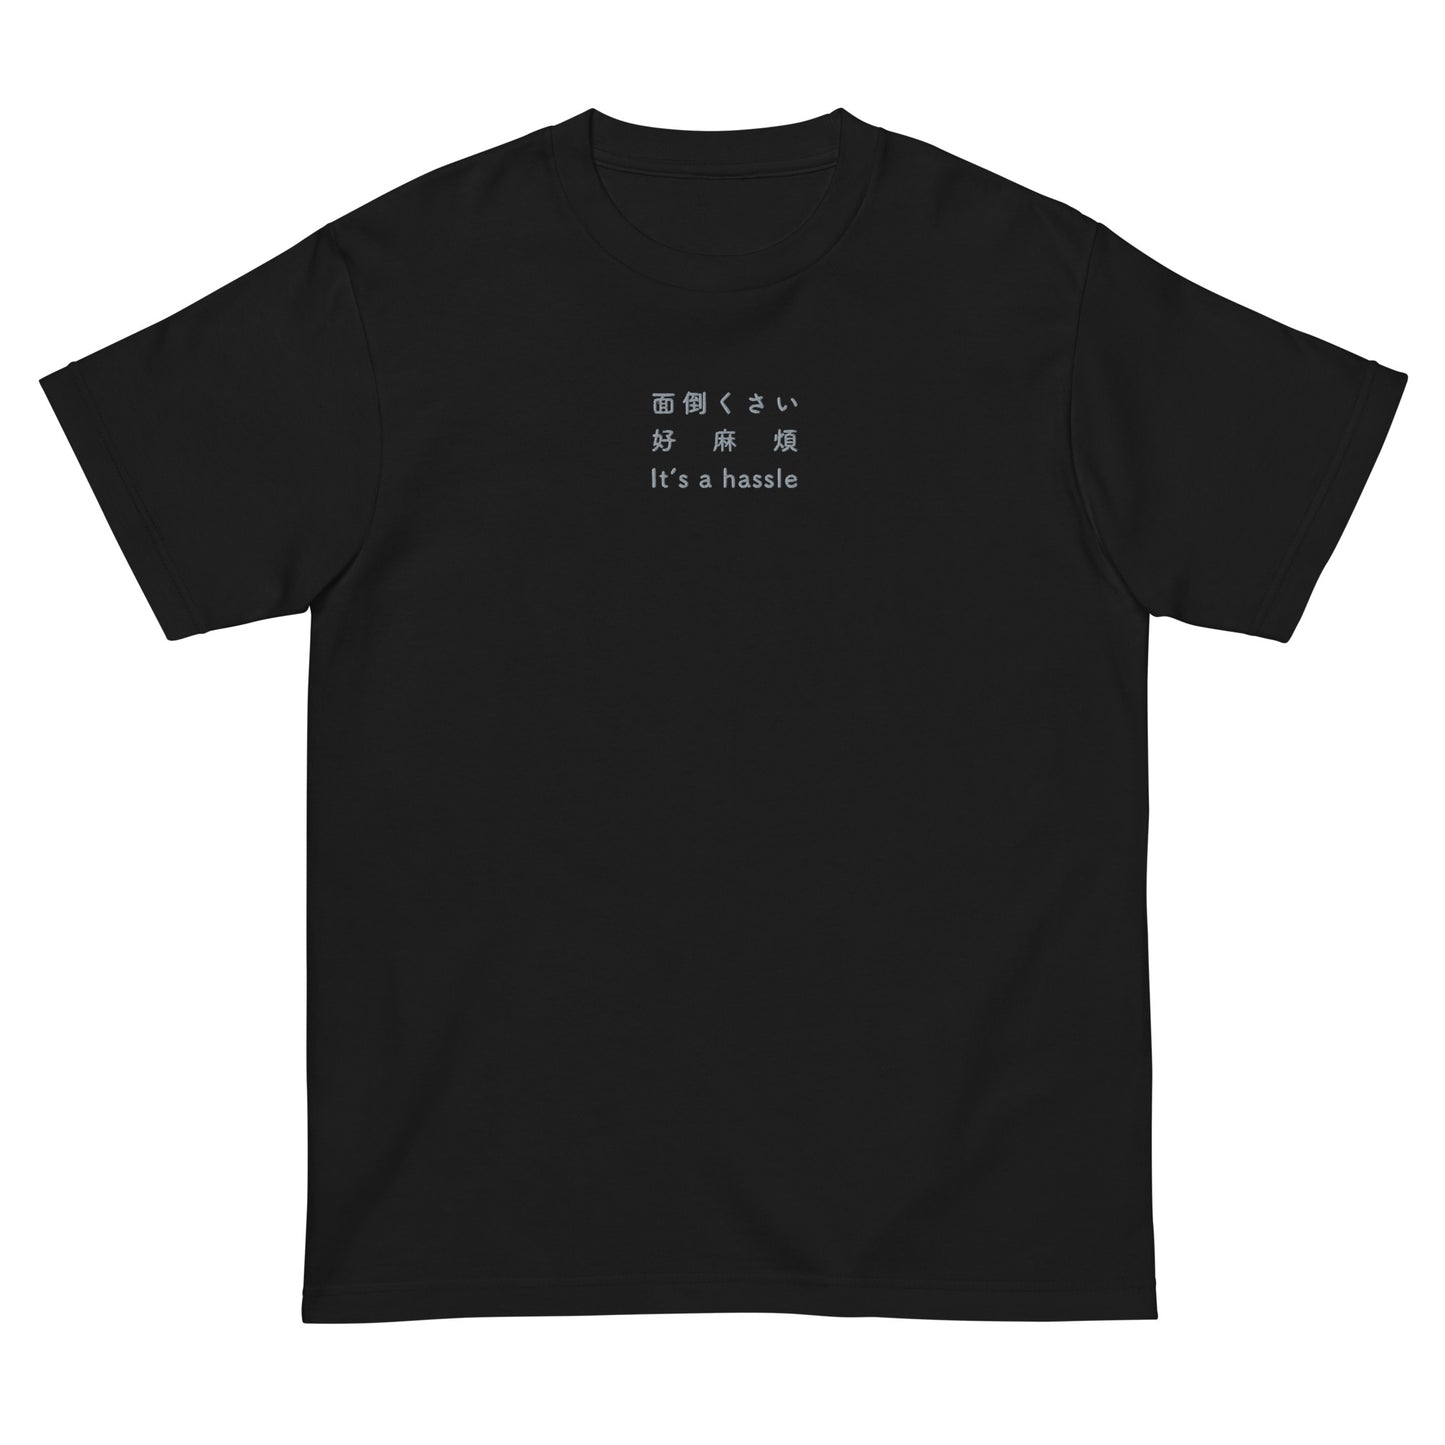 Black High Quality Tee - Front Design with an Light GrayEmbroidery "It's a hassle" in Japanese,Chinese and English